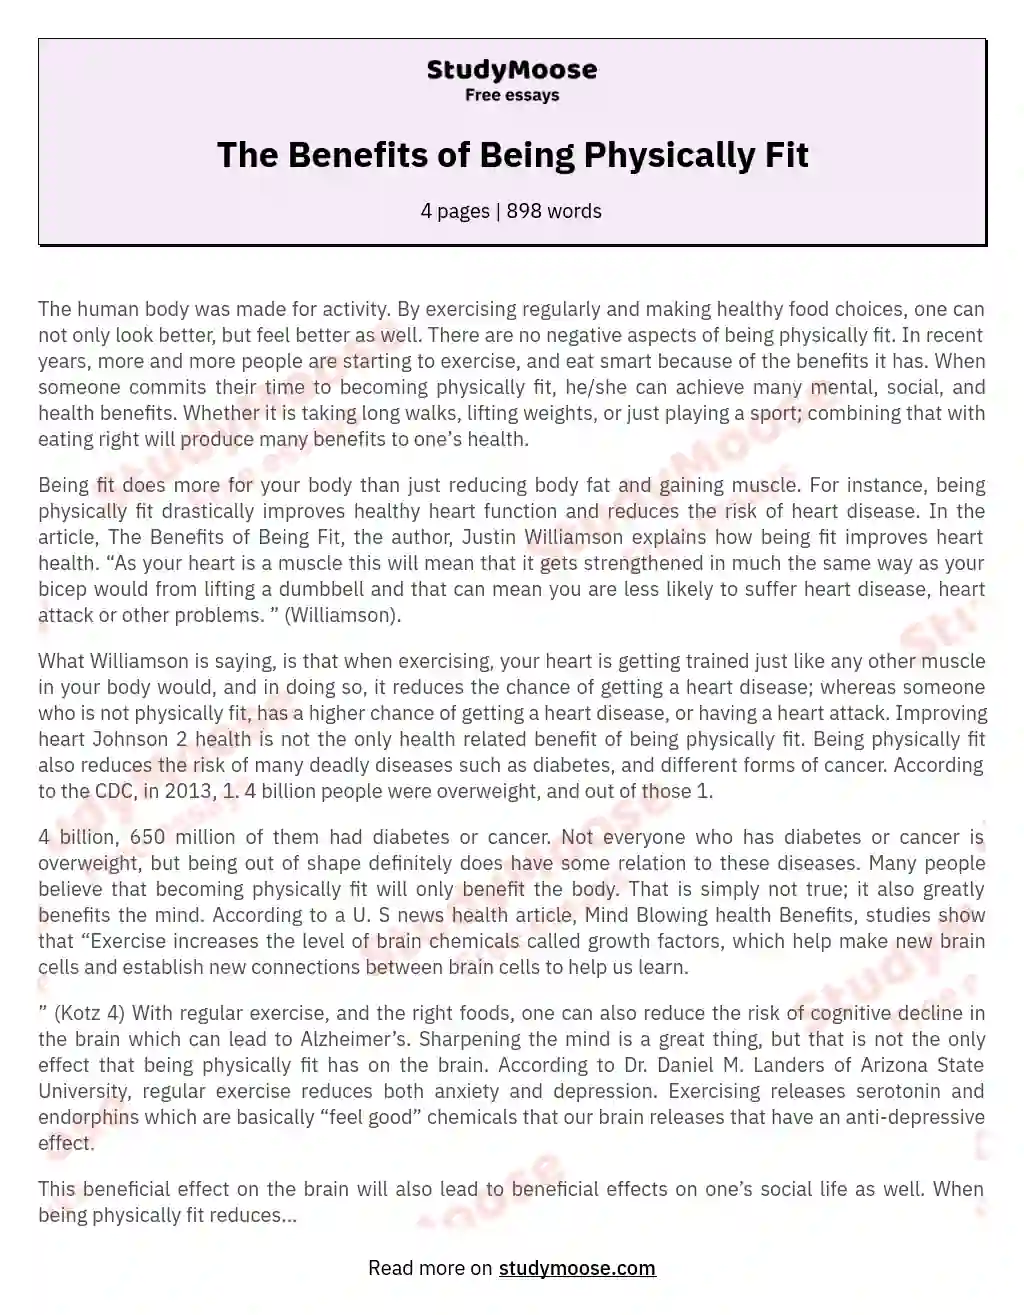 The Benefits of Being Physically Fit essay